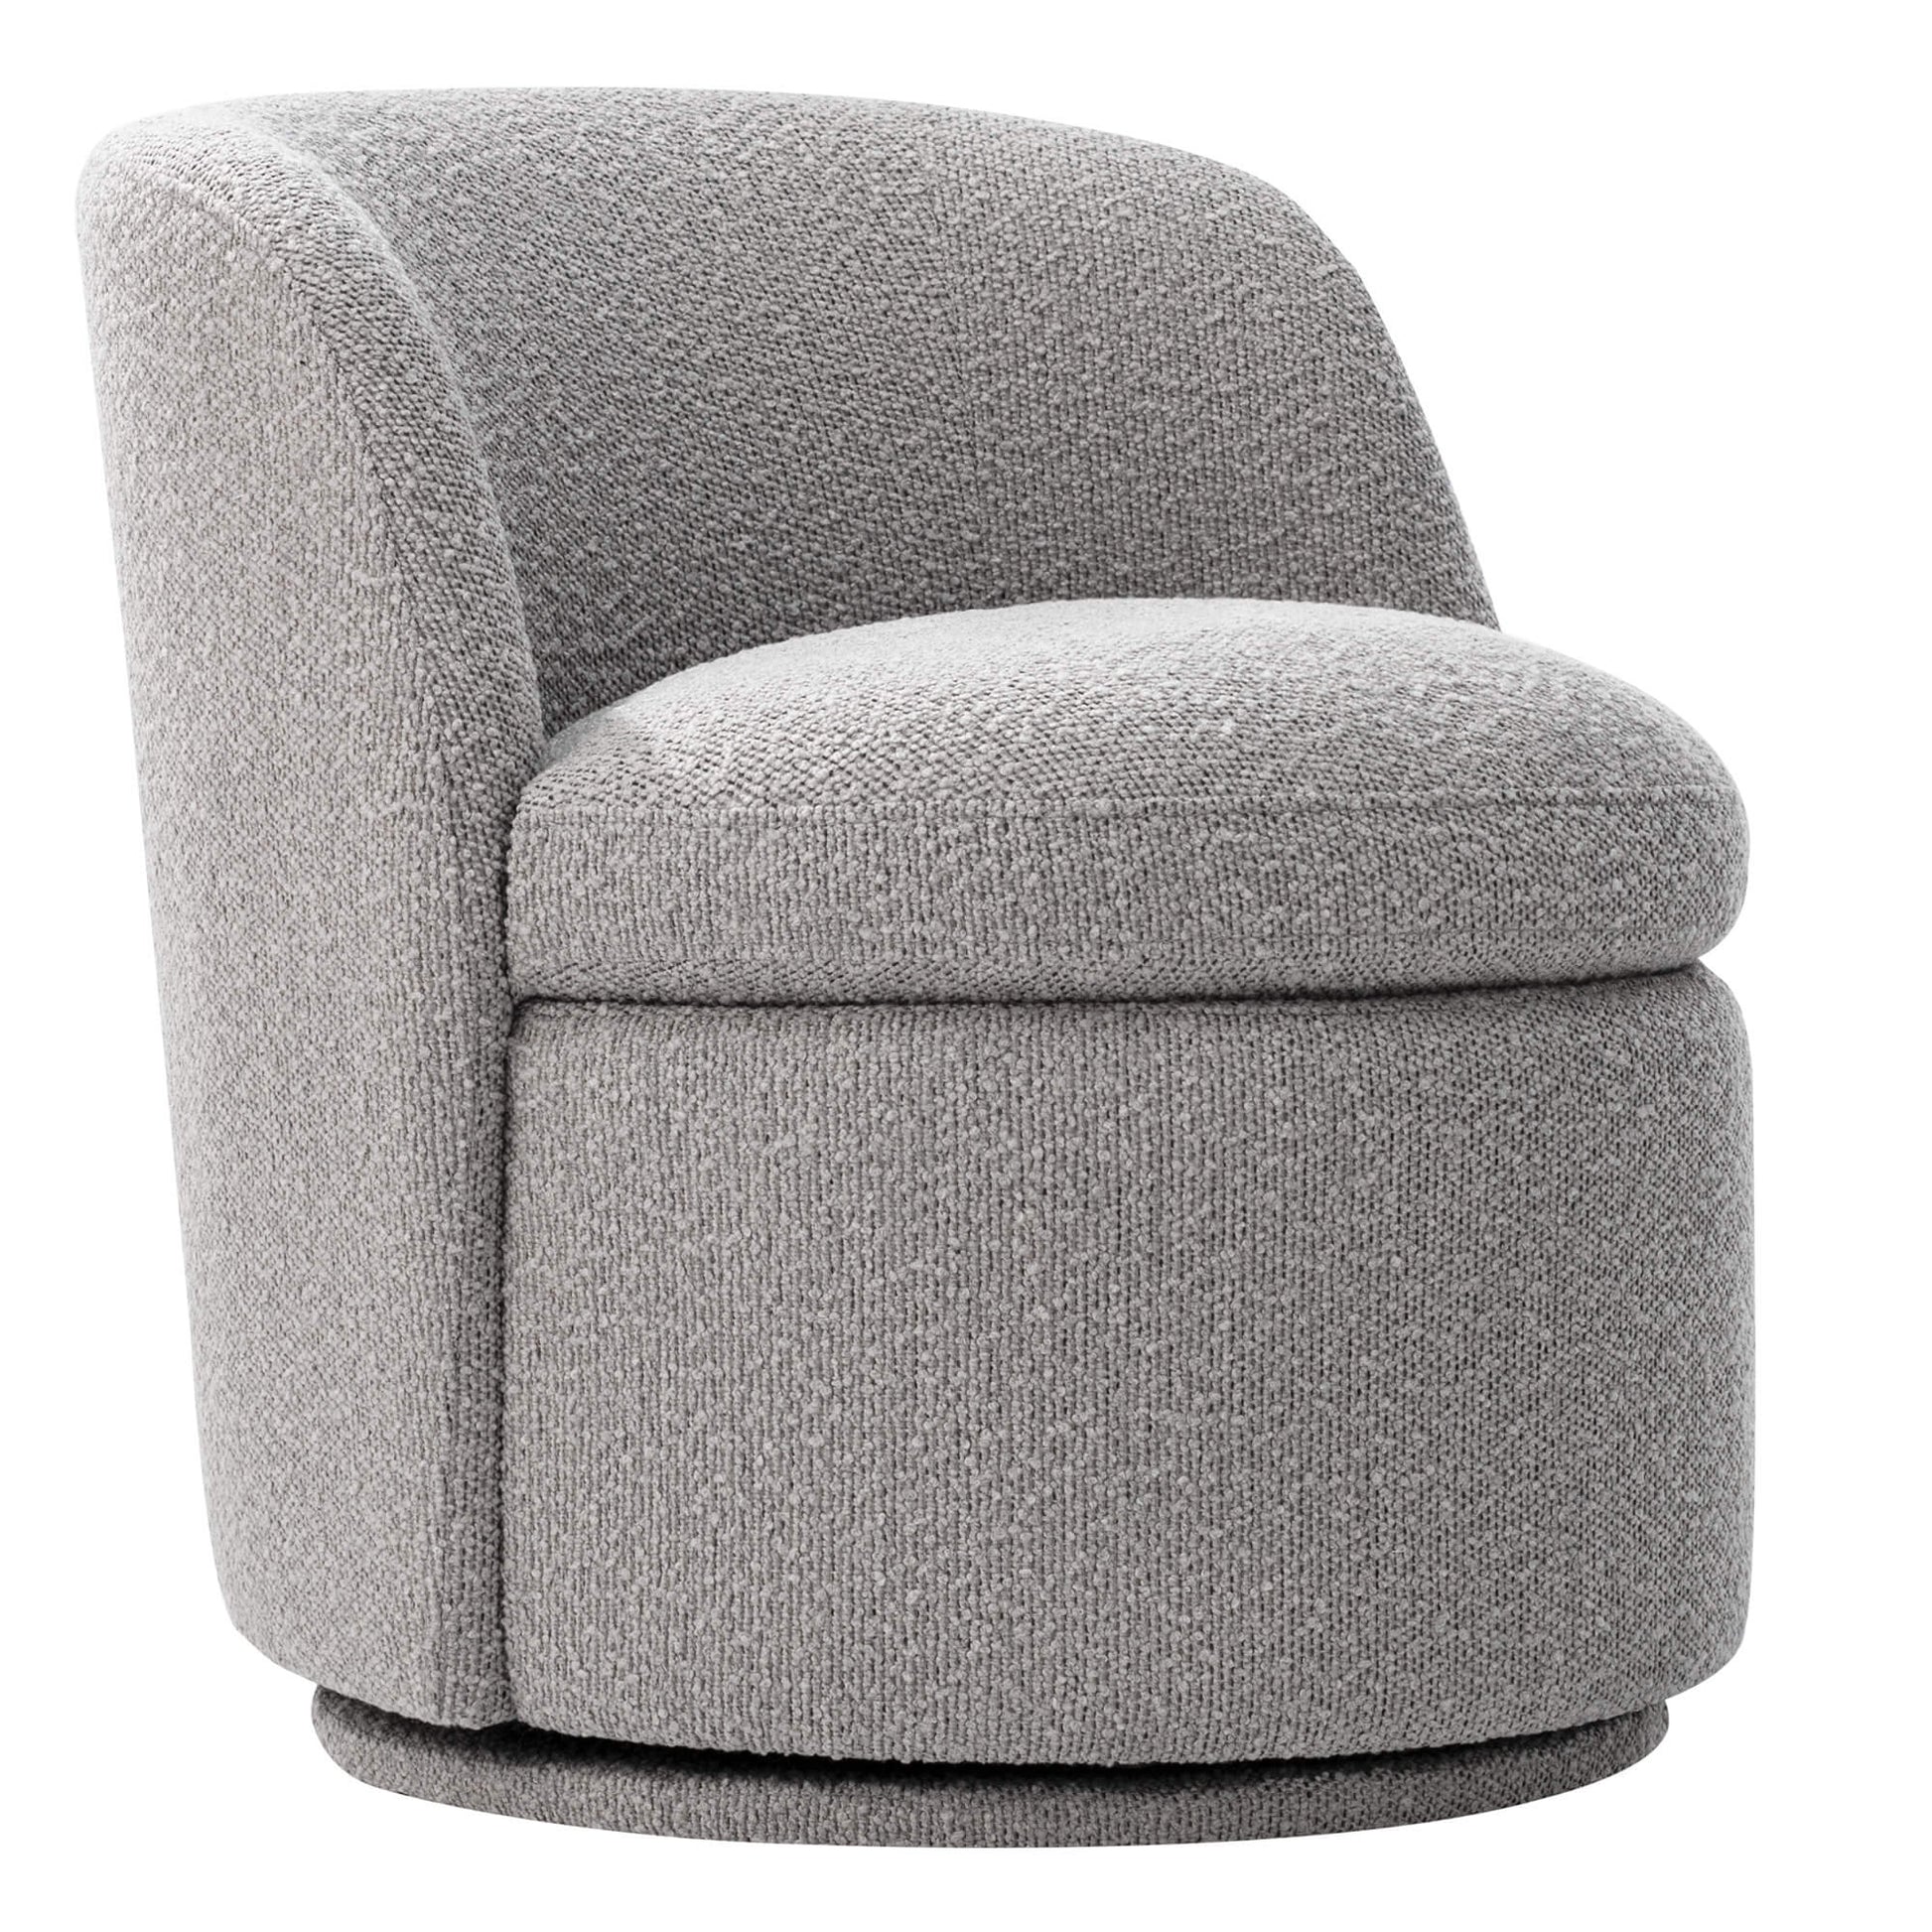 CHITA LIVING-Jolie Boucle Swivel Accent Chair-Accent Chair-Fabric-Light Grey-